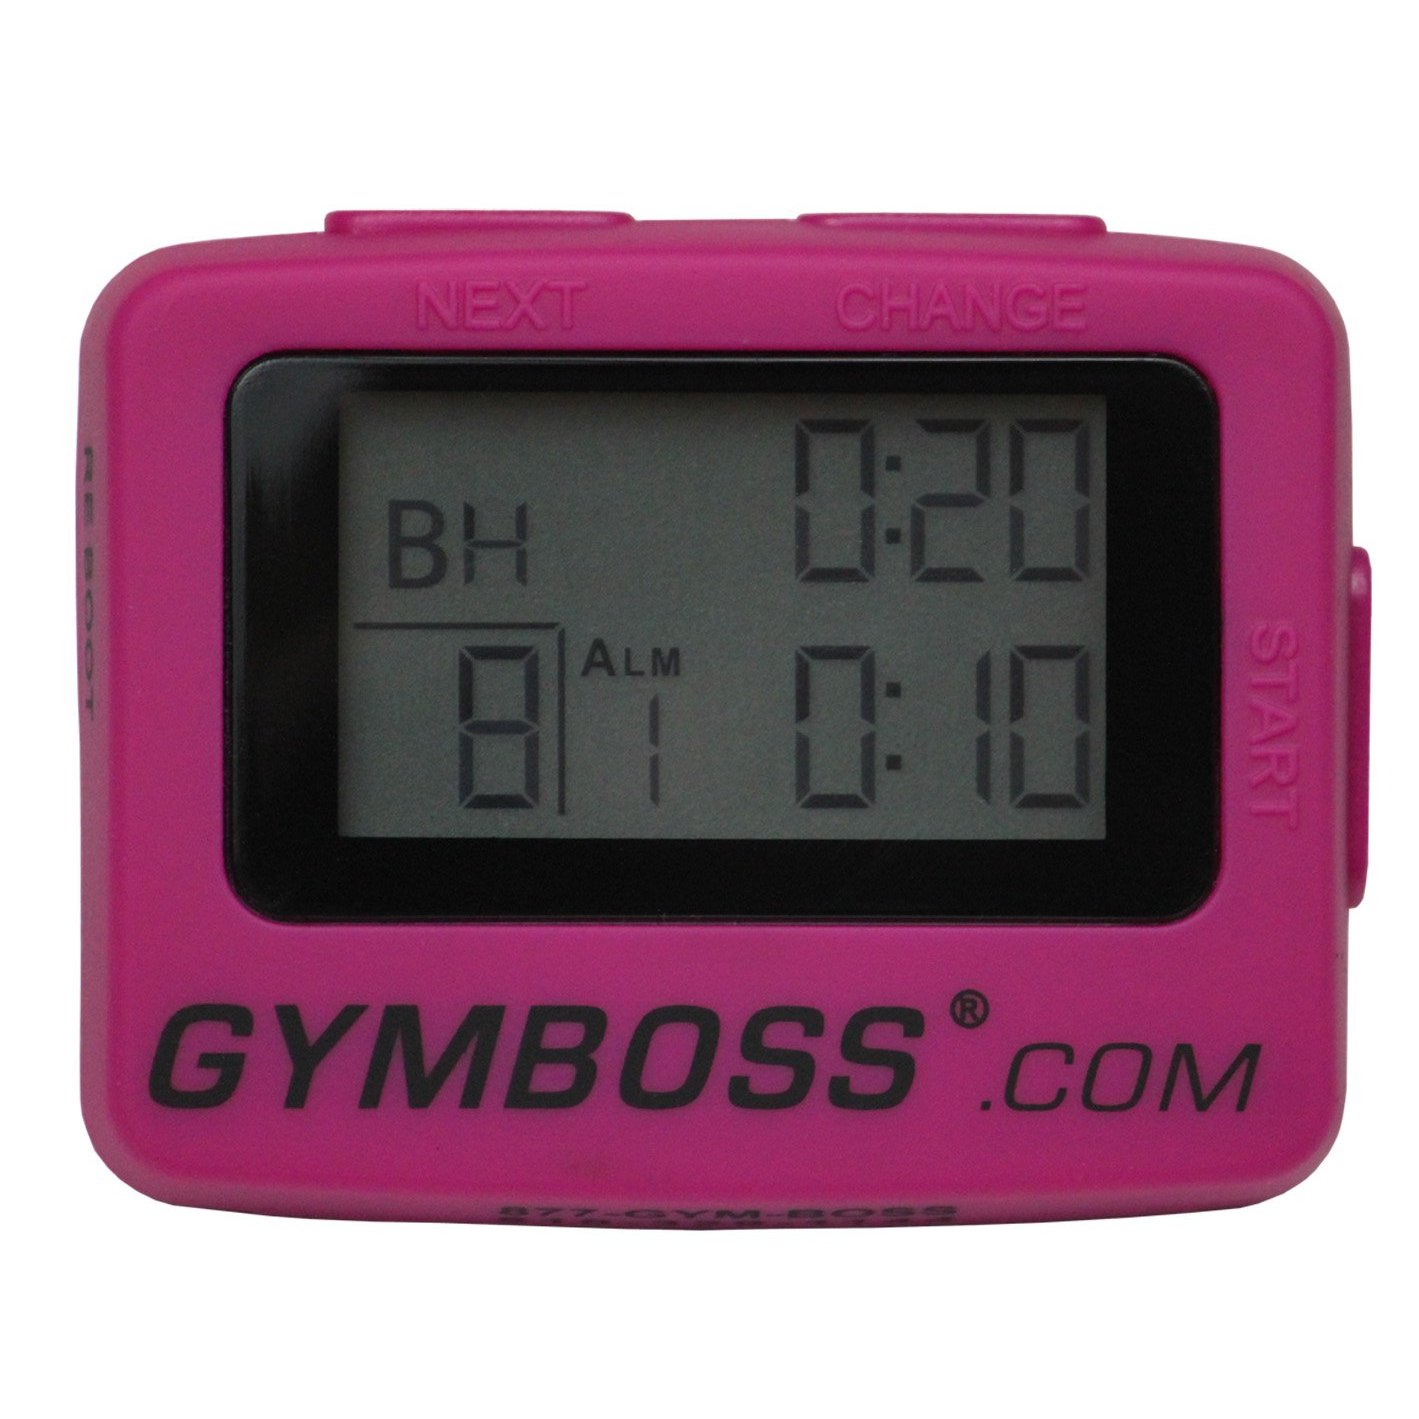 gymboss interval timer instructions